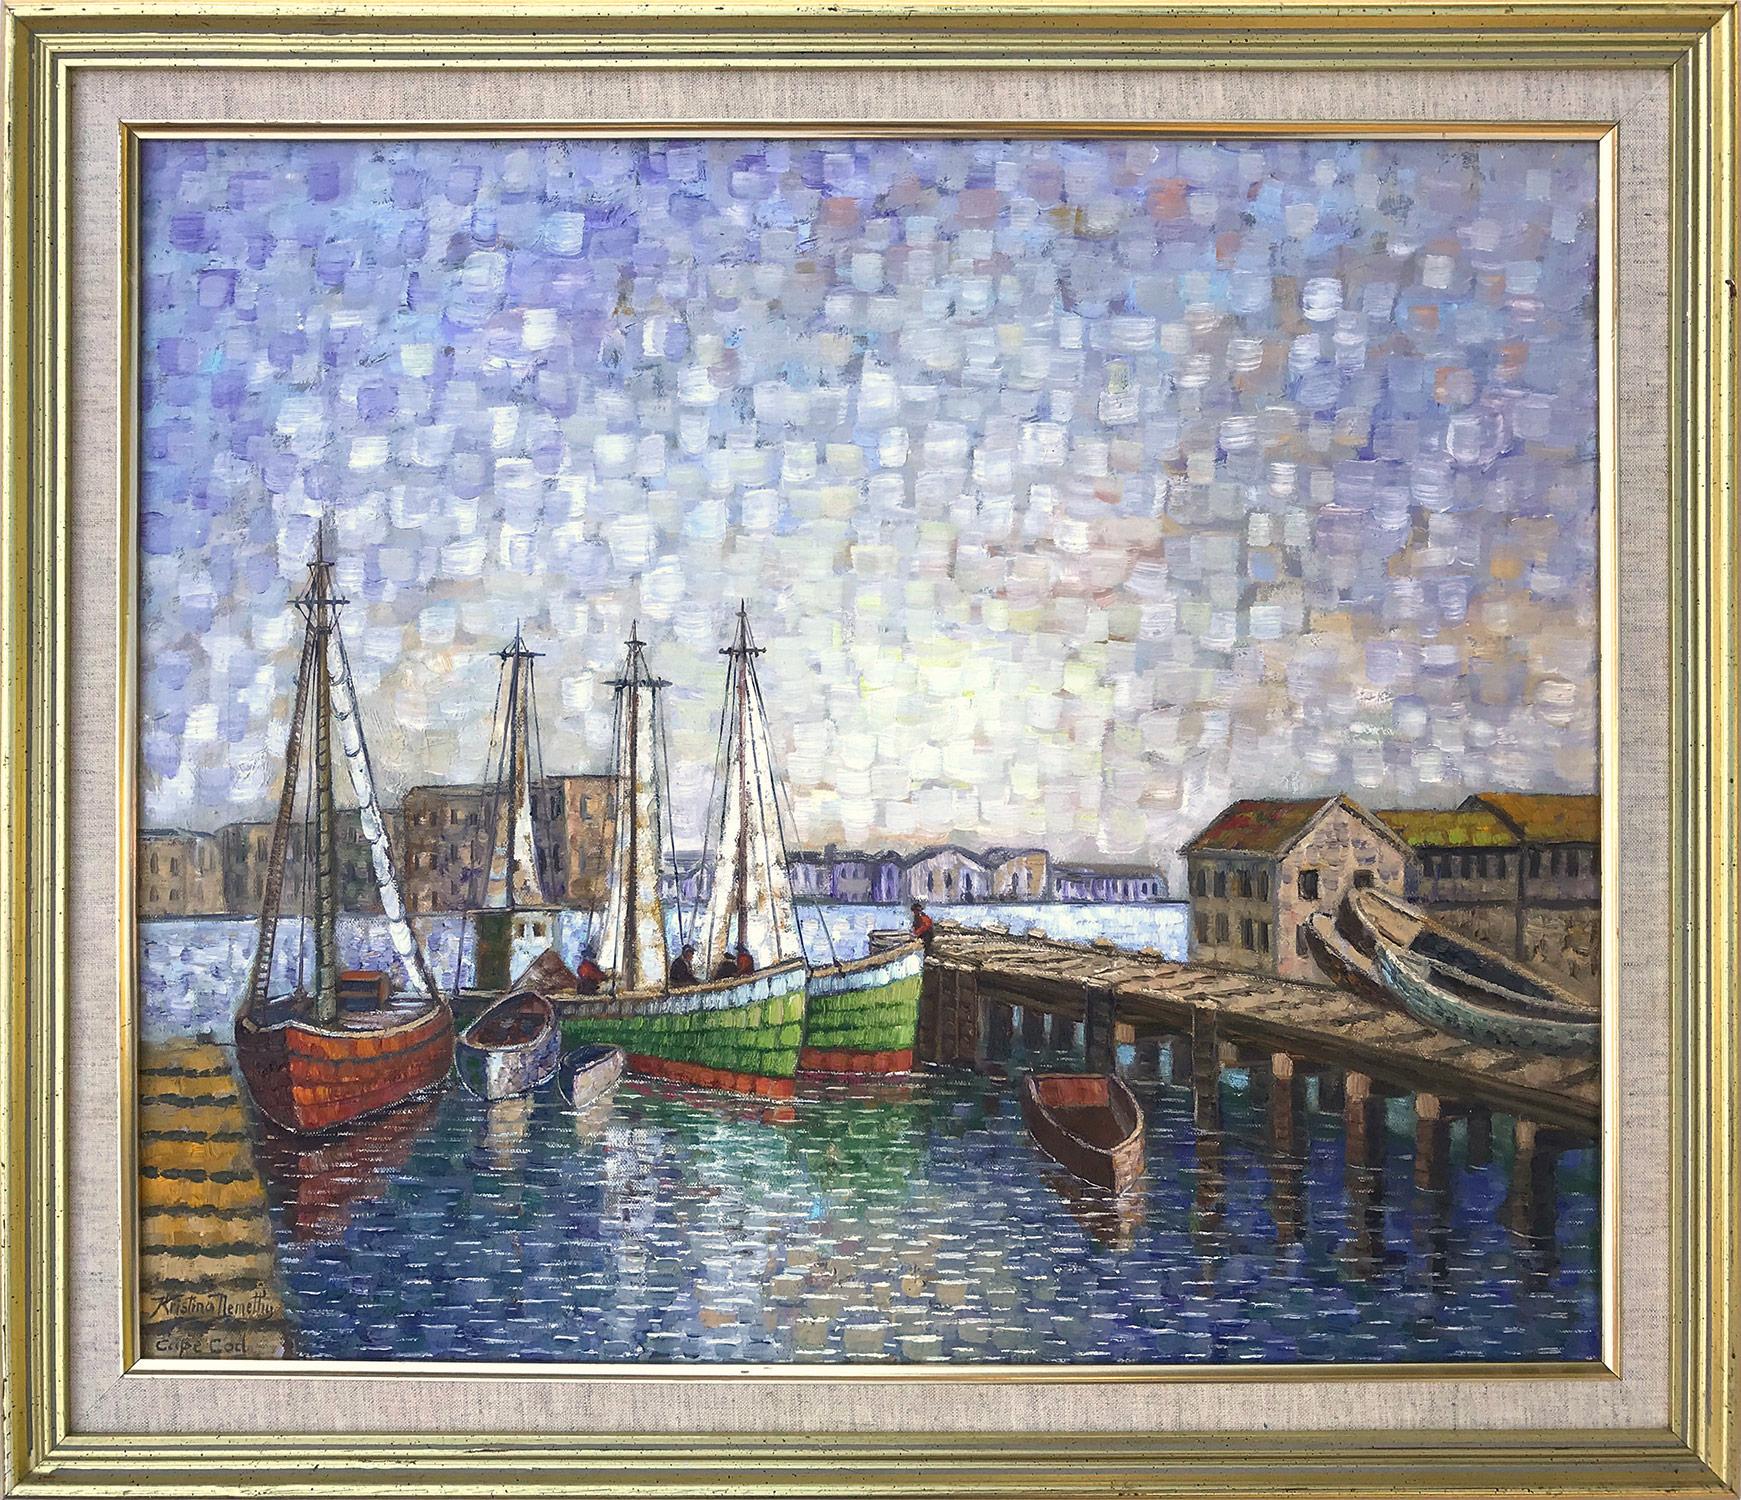 Kristina Nemethy Figurative Painting - "Cape Cod" American Impressionist Oil Painting on Canvas of Boats On the Docks